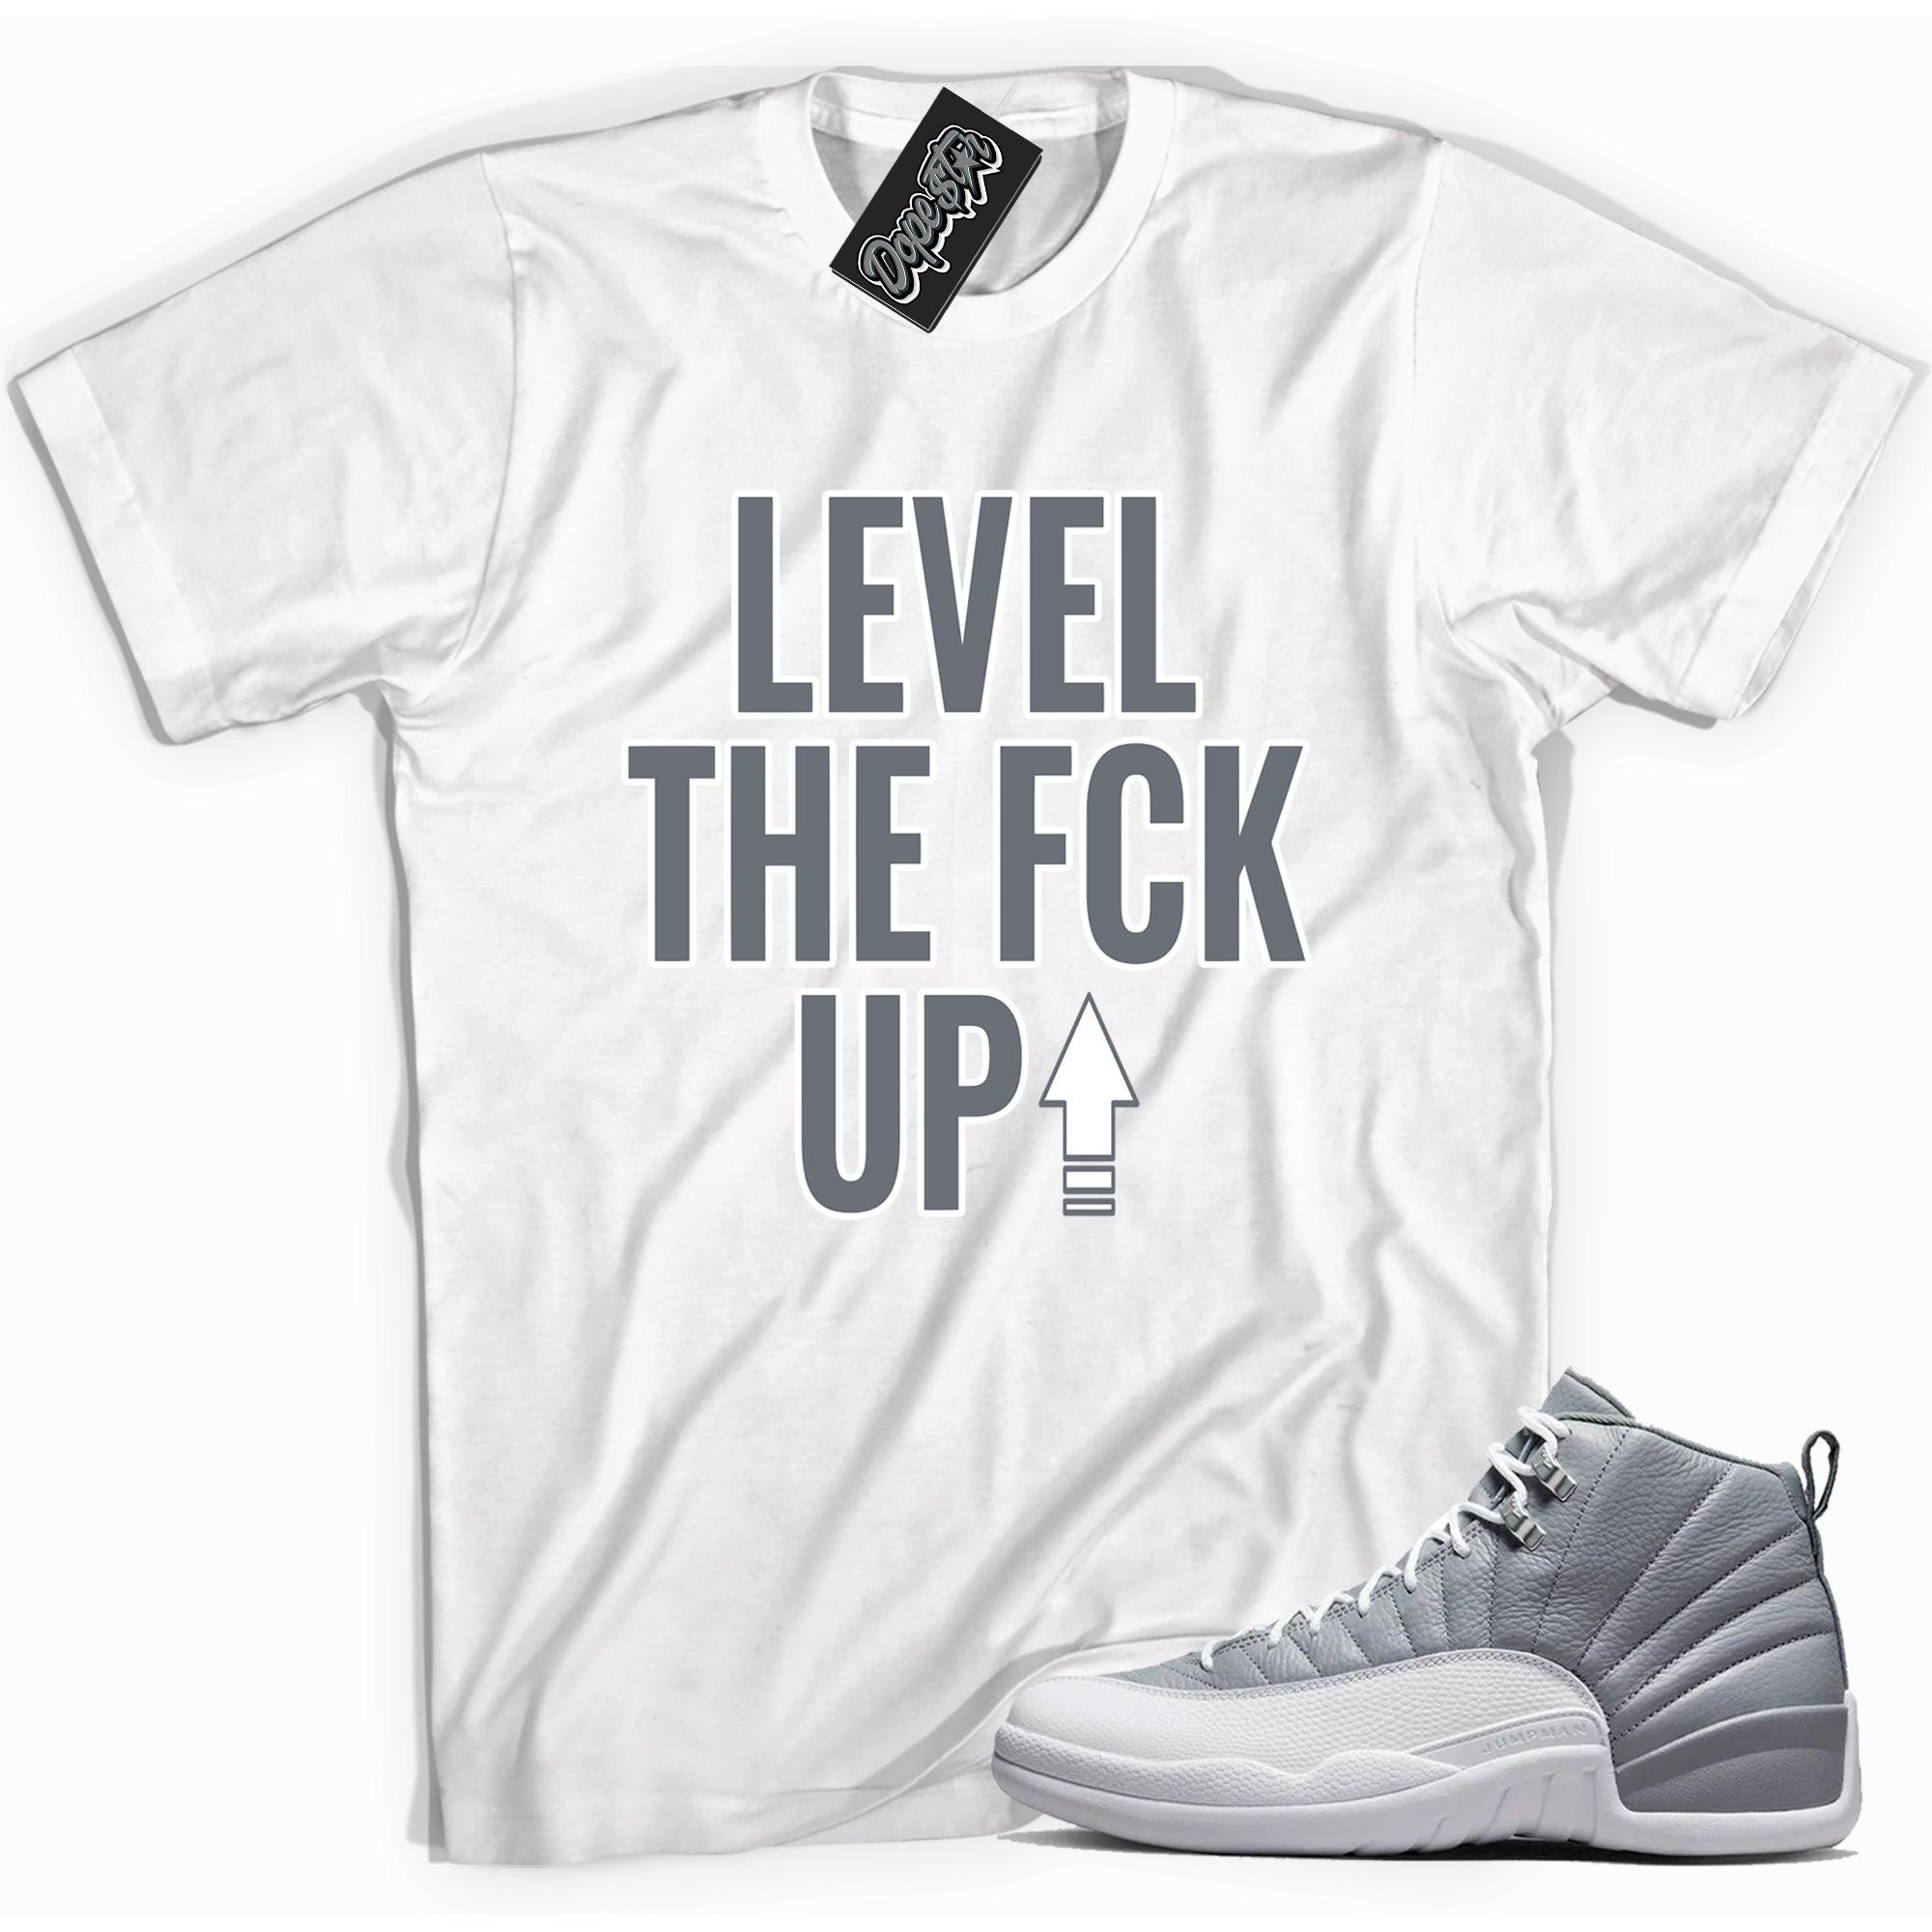 Cool white graphic tee with 'Level Up' print, that perfectly matches Air Jordan 12 Retro Stealth sneakers.